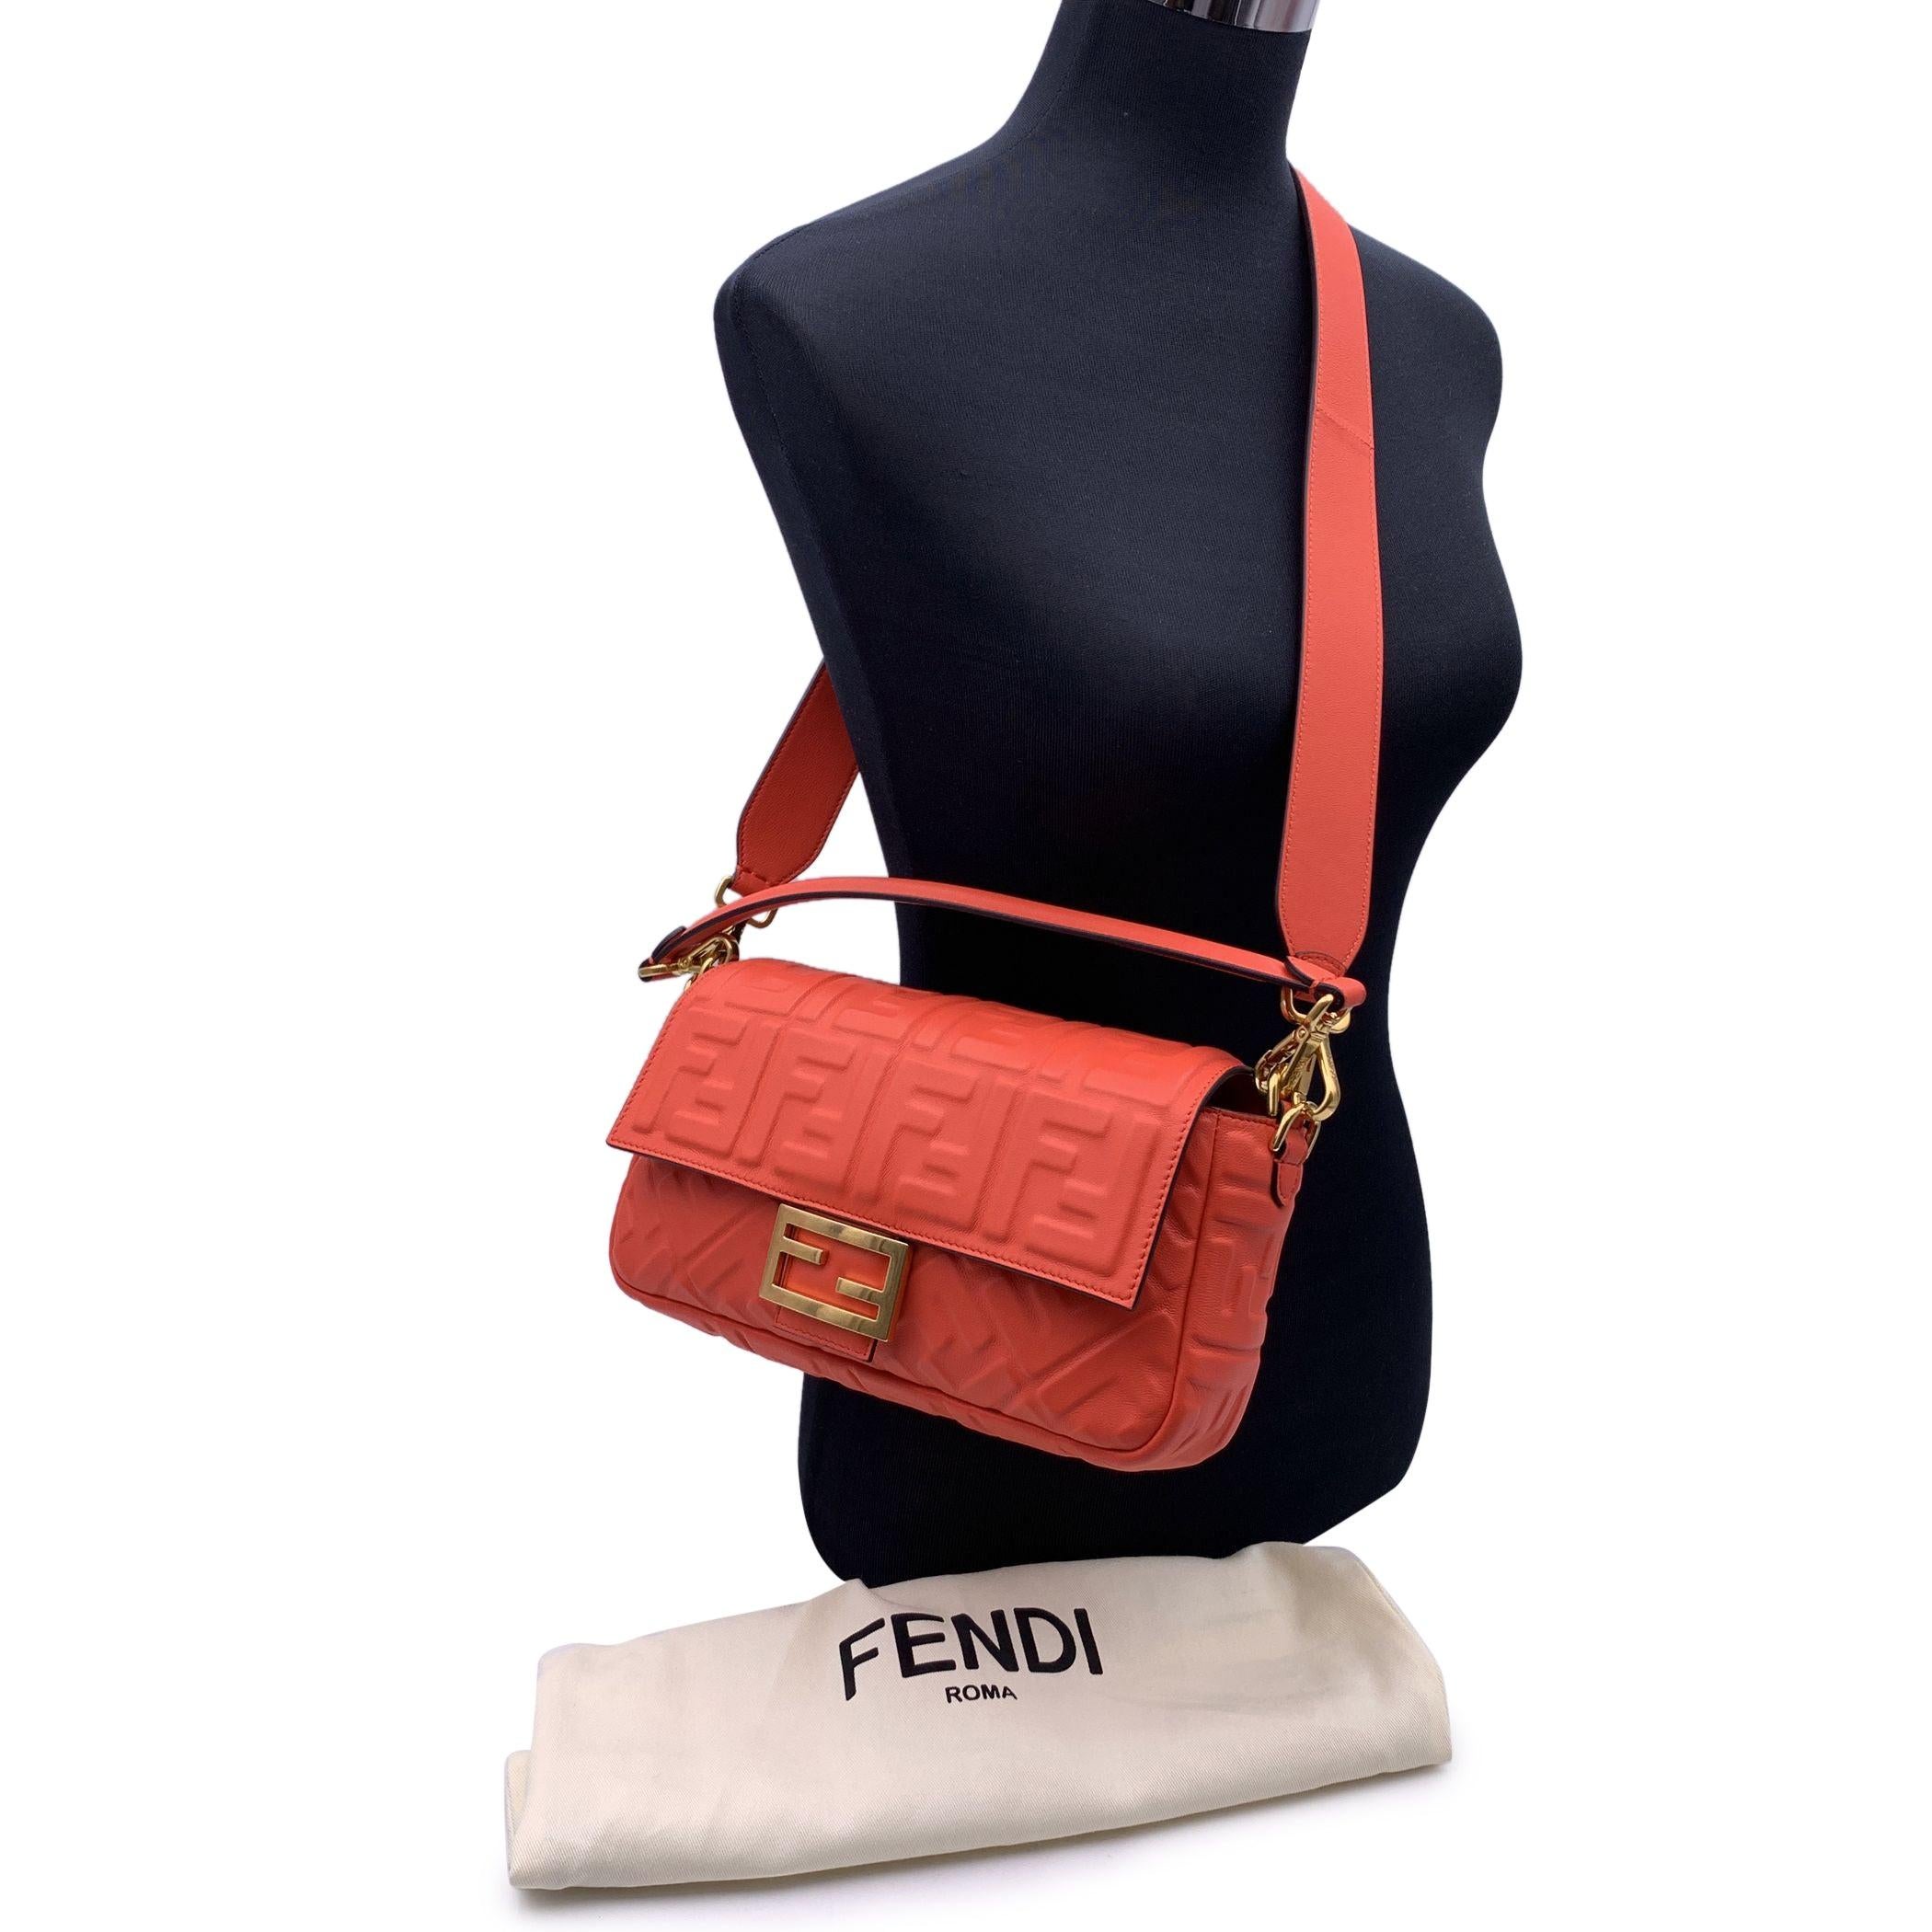 This beautiful Bag will come with a Certificate of Authenticity provided by Entrupy, The certificate will be provided at no further cost. Gorgeous FENDI 'Baguette' bag in orange red leather with embossed FF monogram Zucca pattern. A simple and